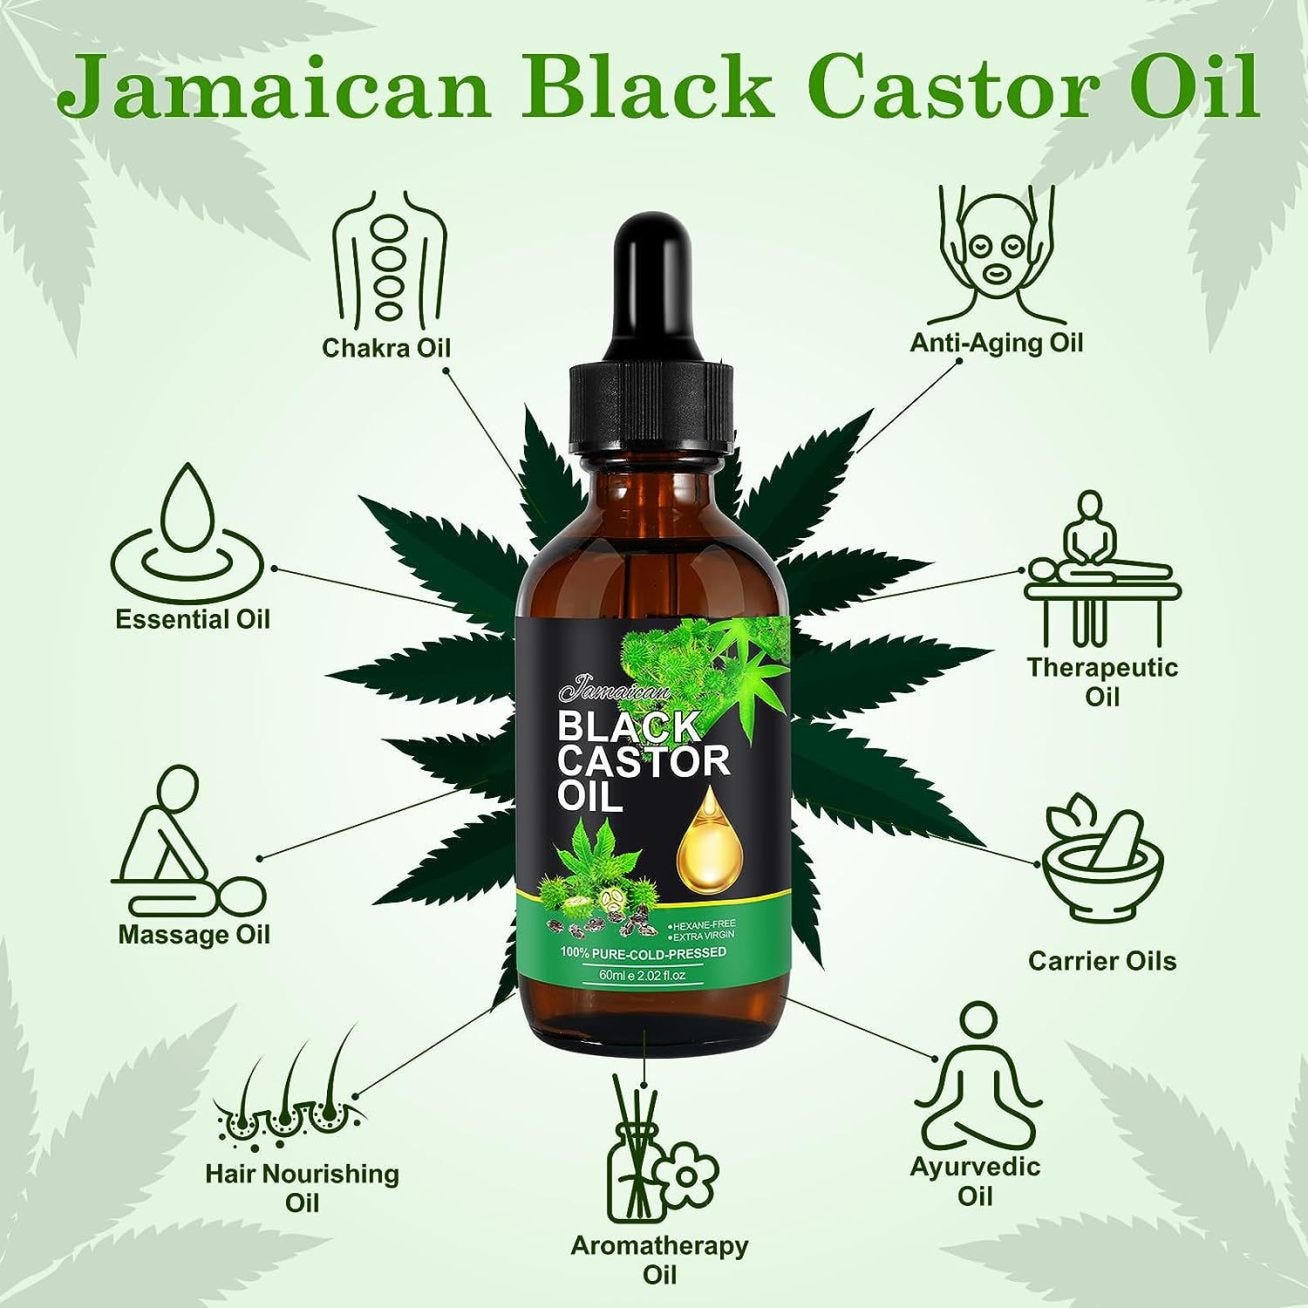 JAMAICAN BLACK CASTOR OIL: BENEFITS, USES, AND EVERYTHING YOU NEED TO KNOW  | by Espace Shopping | Medium